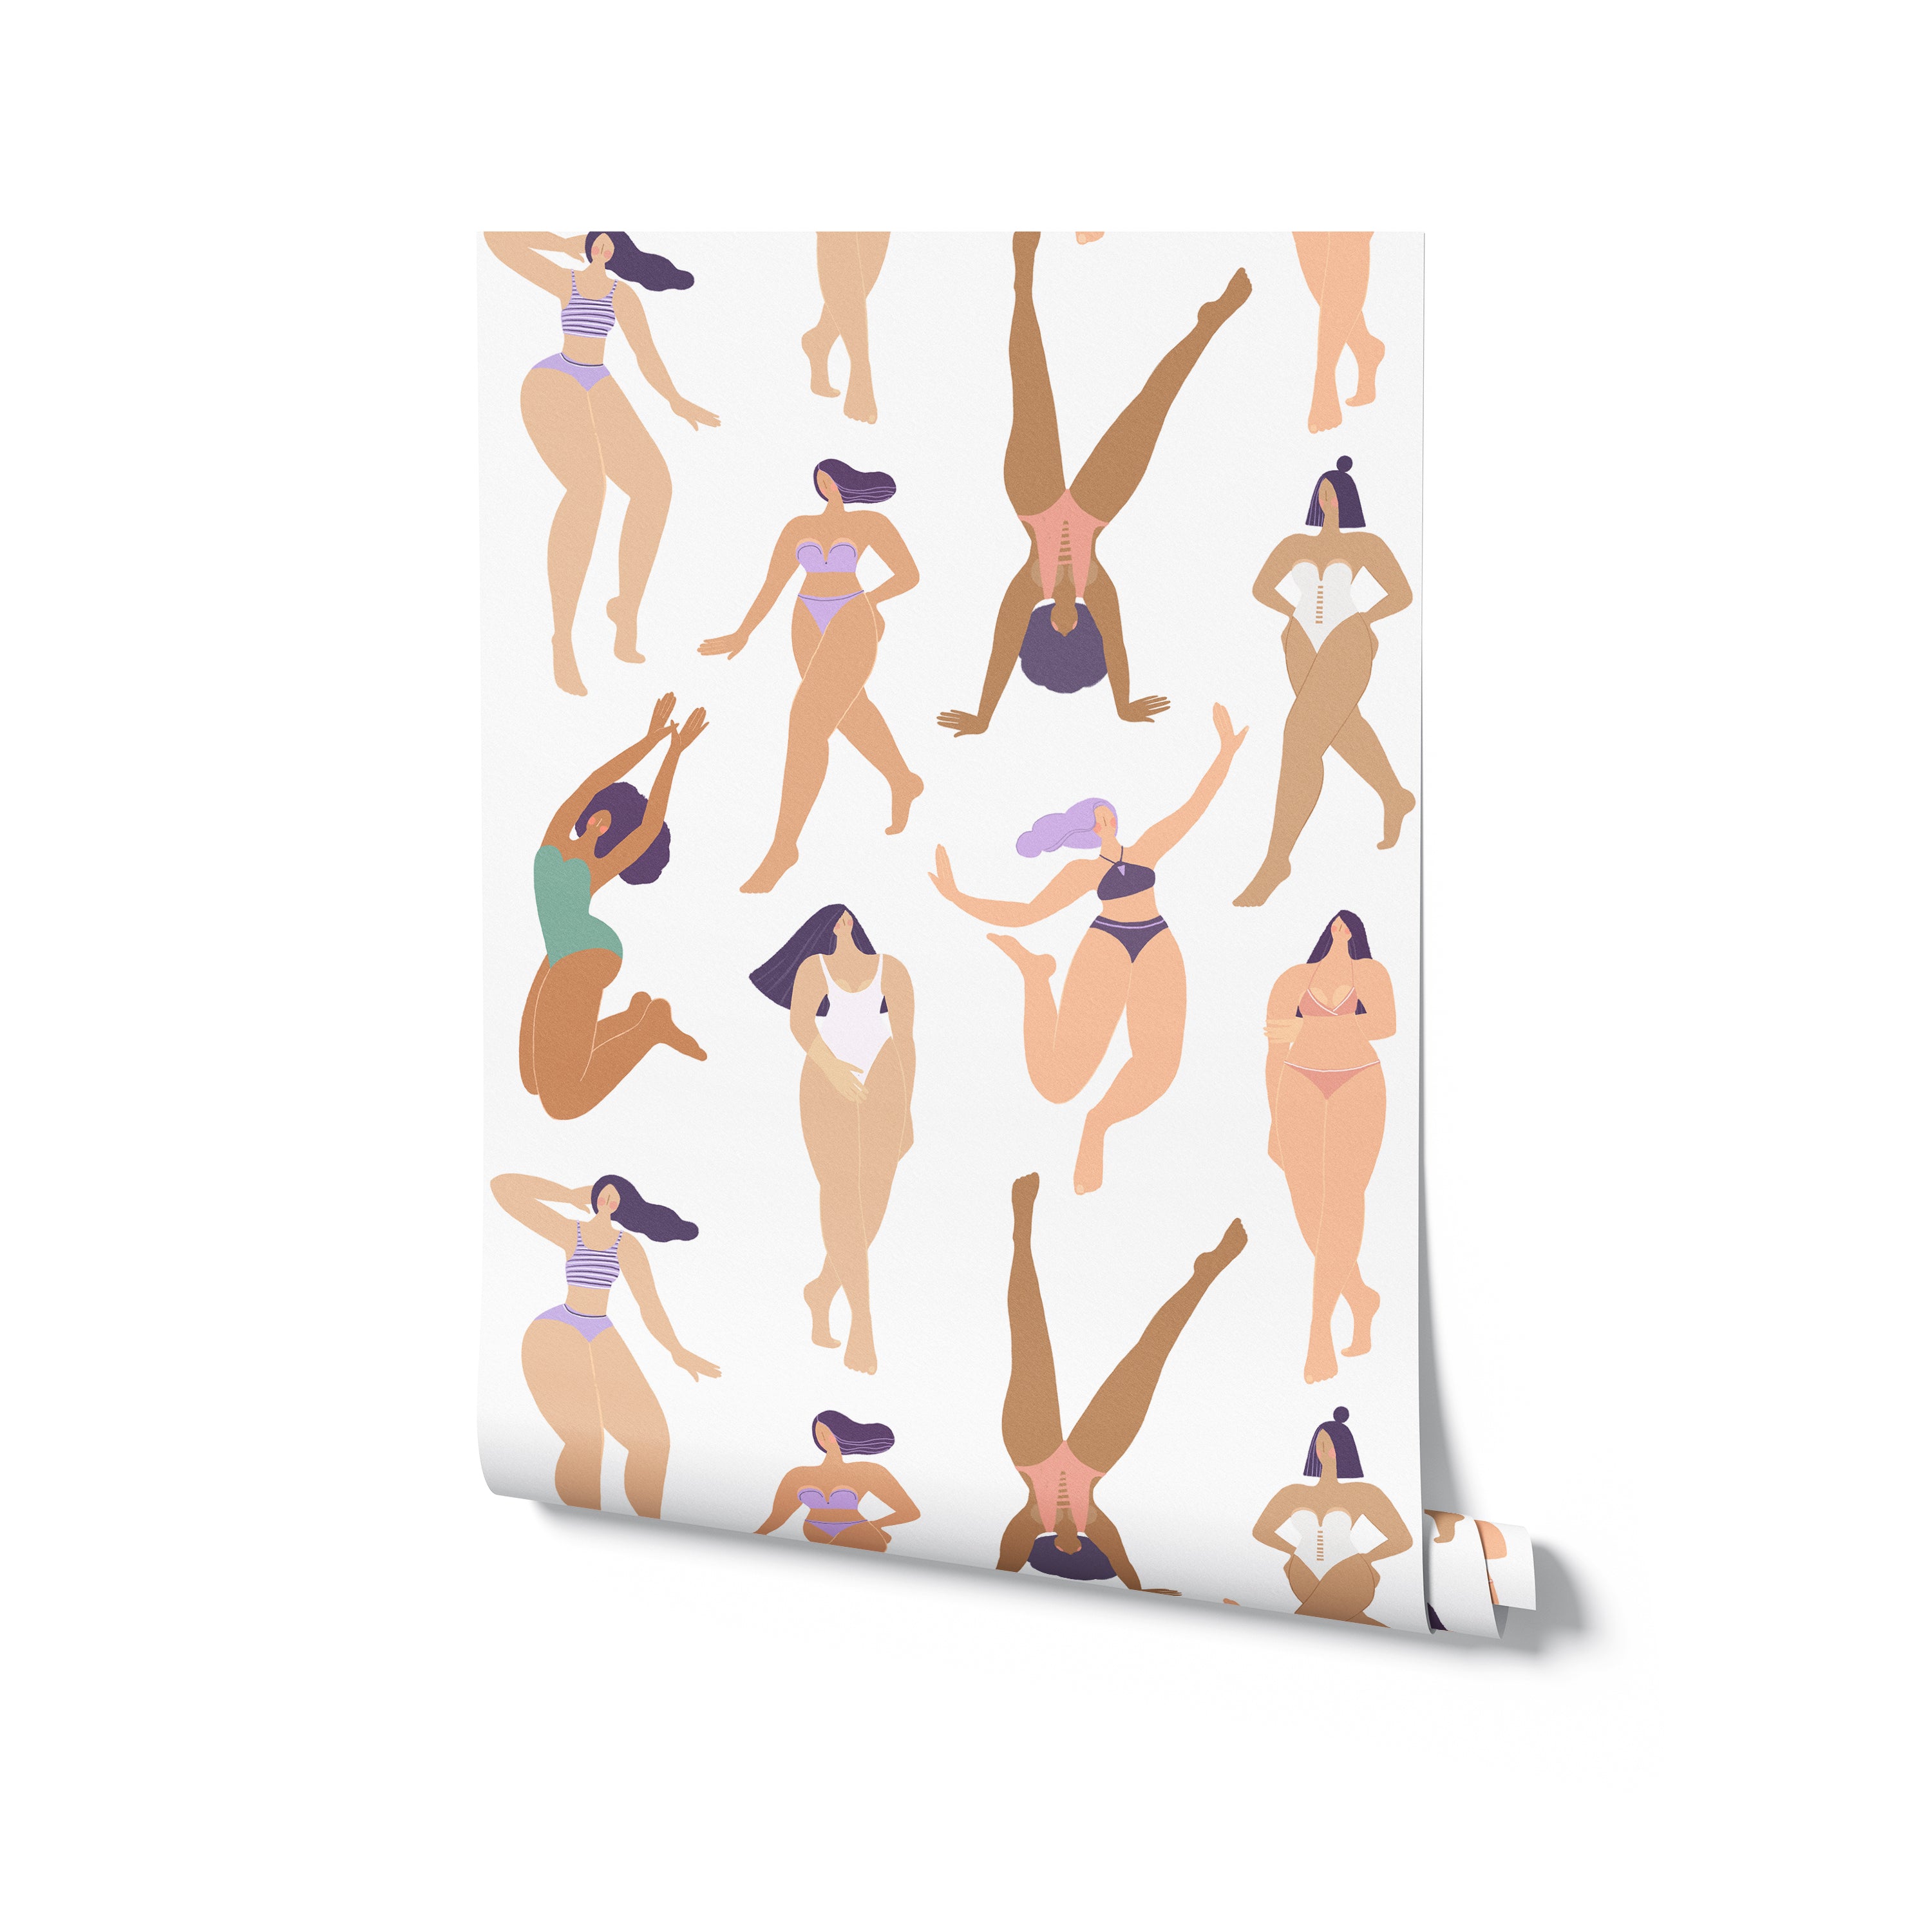 Roll of Girls in Paradise Wallpaper II with pattern of women in various celebratory poses